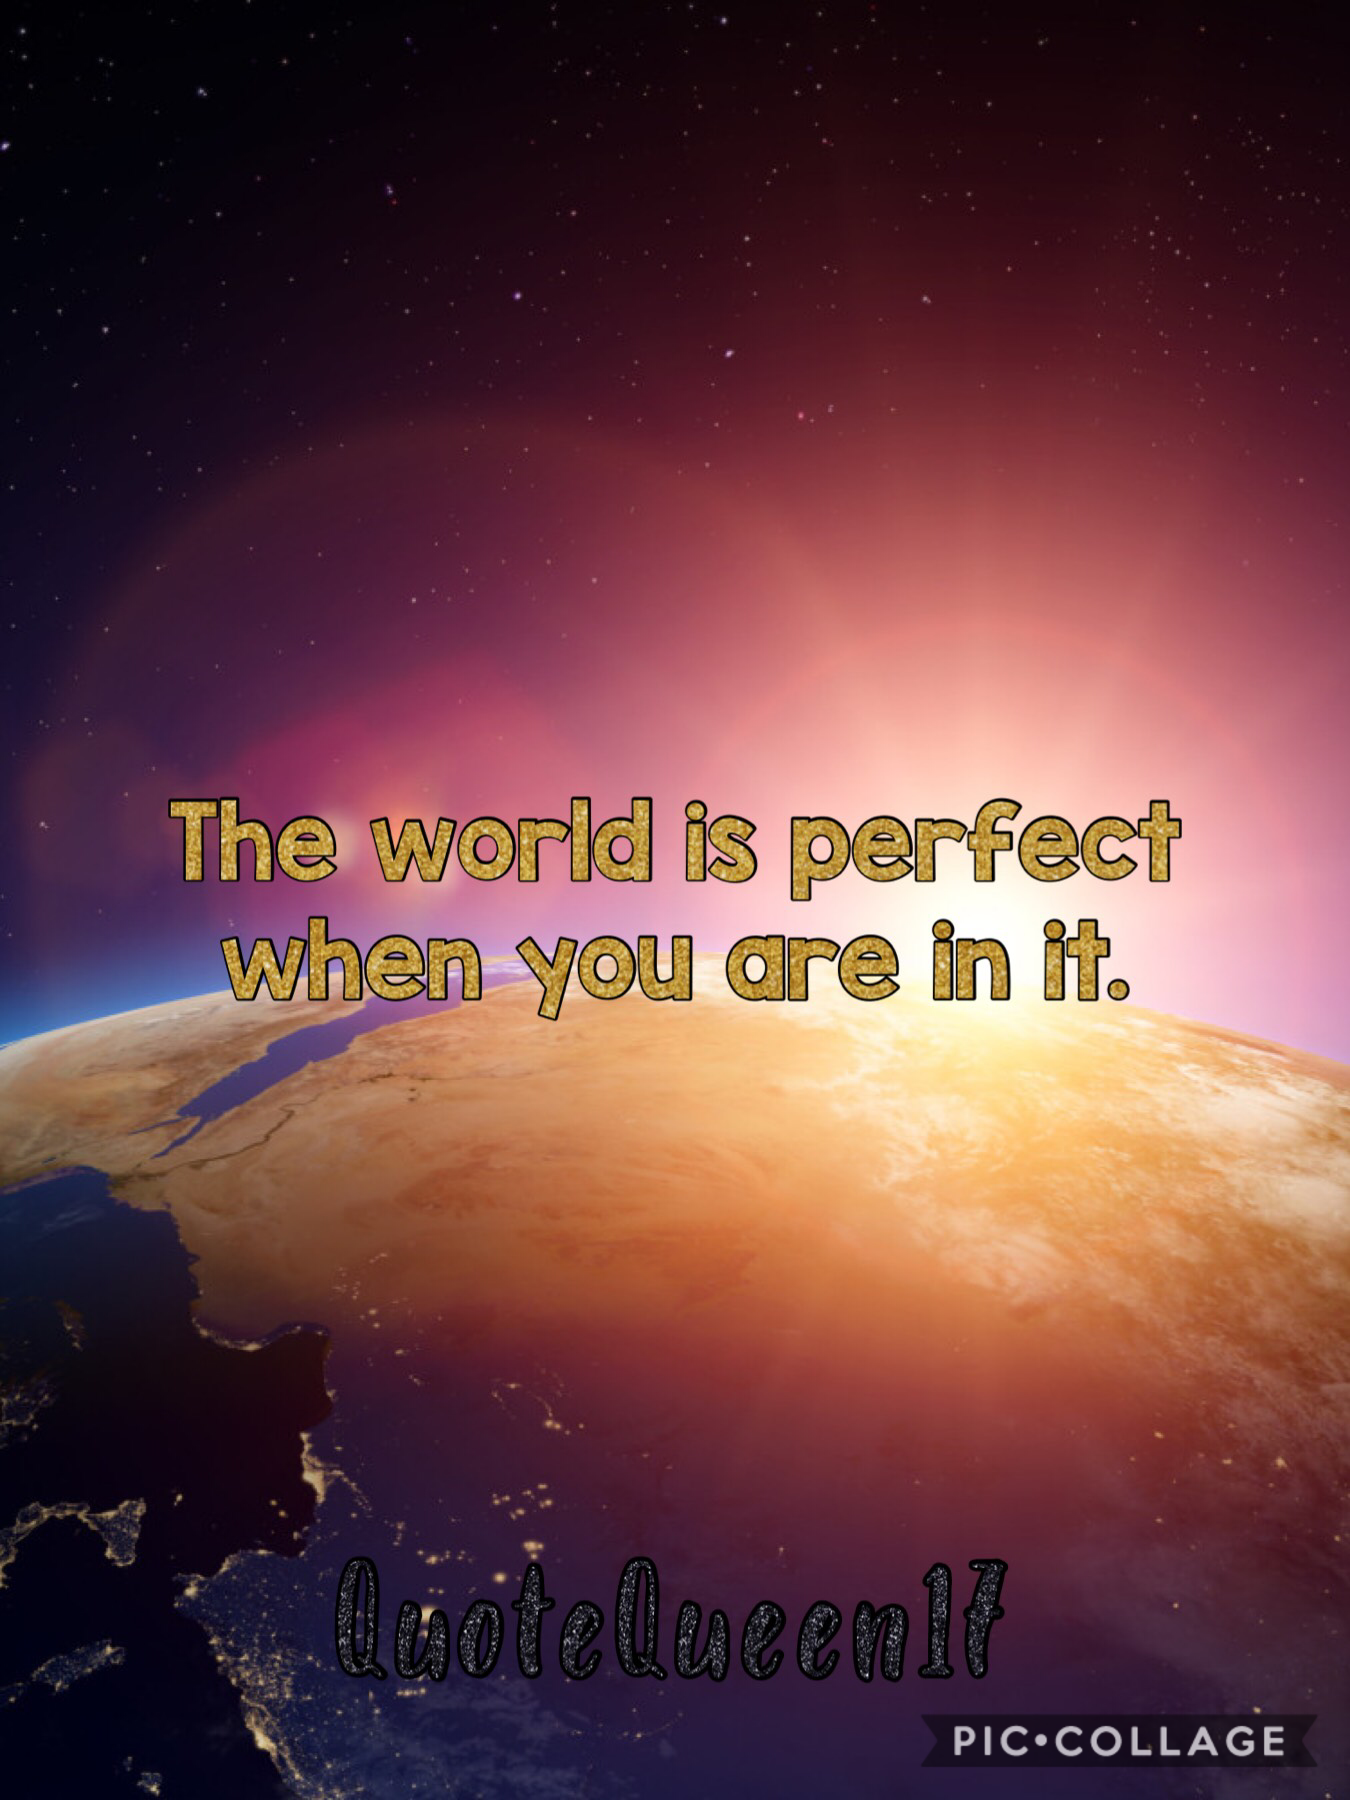 You are perfect just as you!